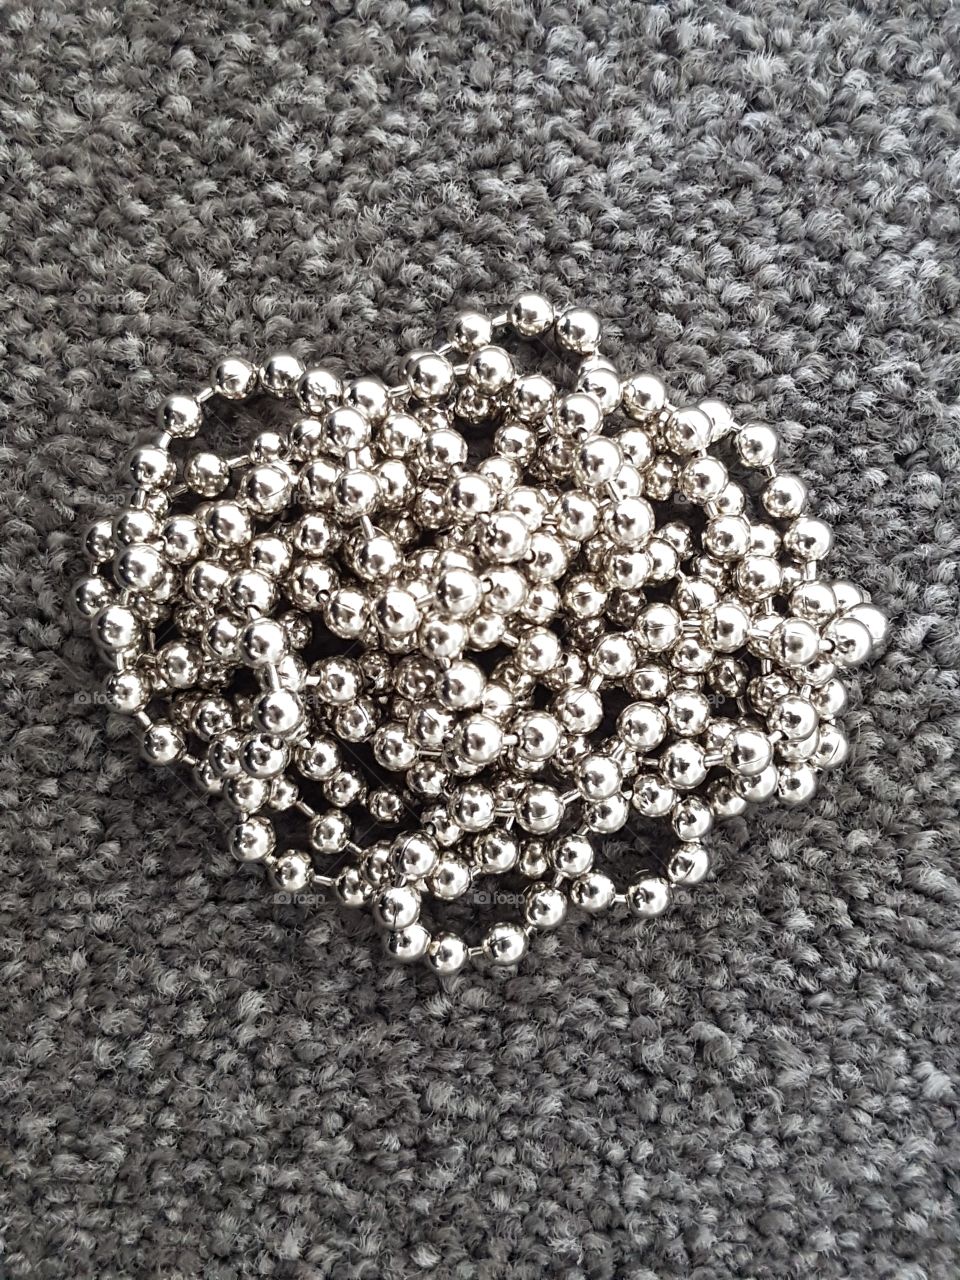 Beads on top of carpet.